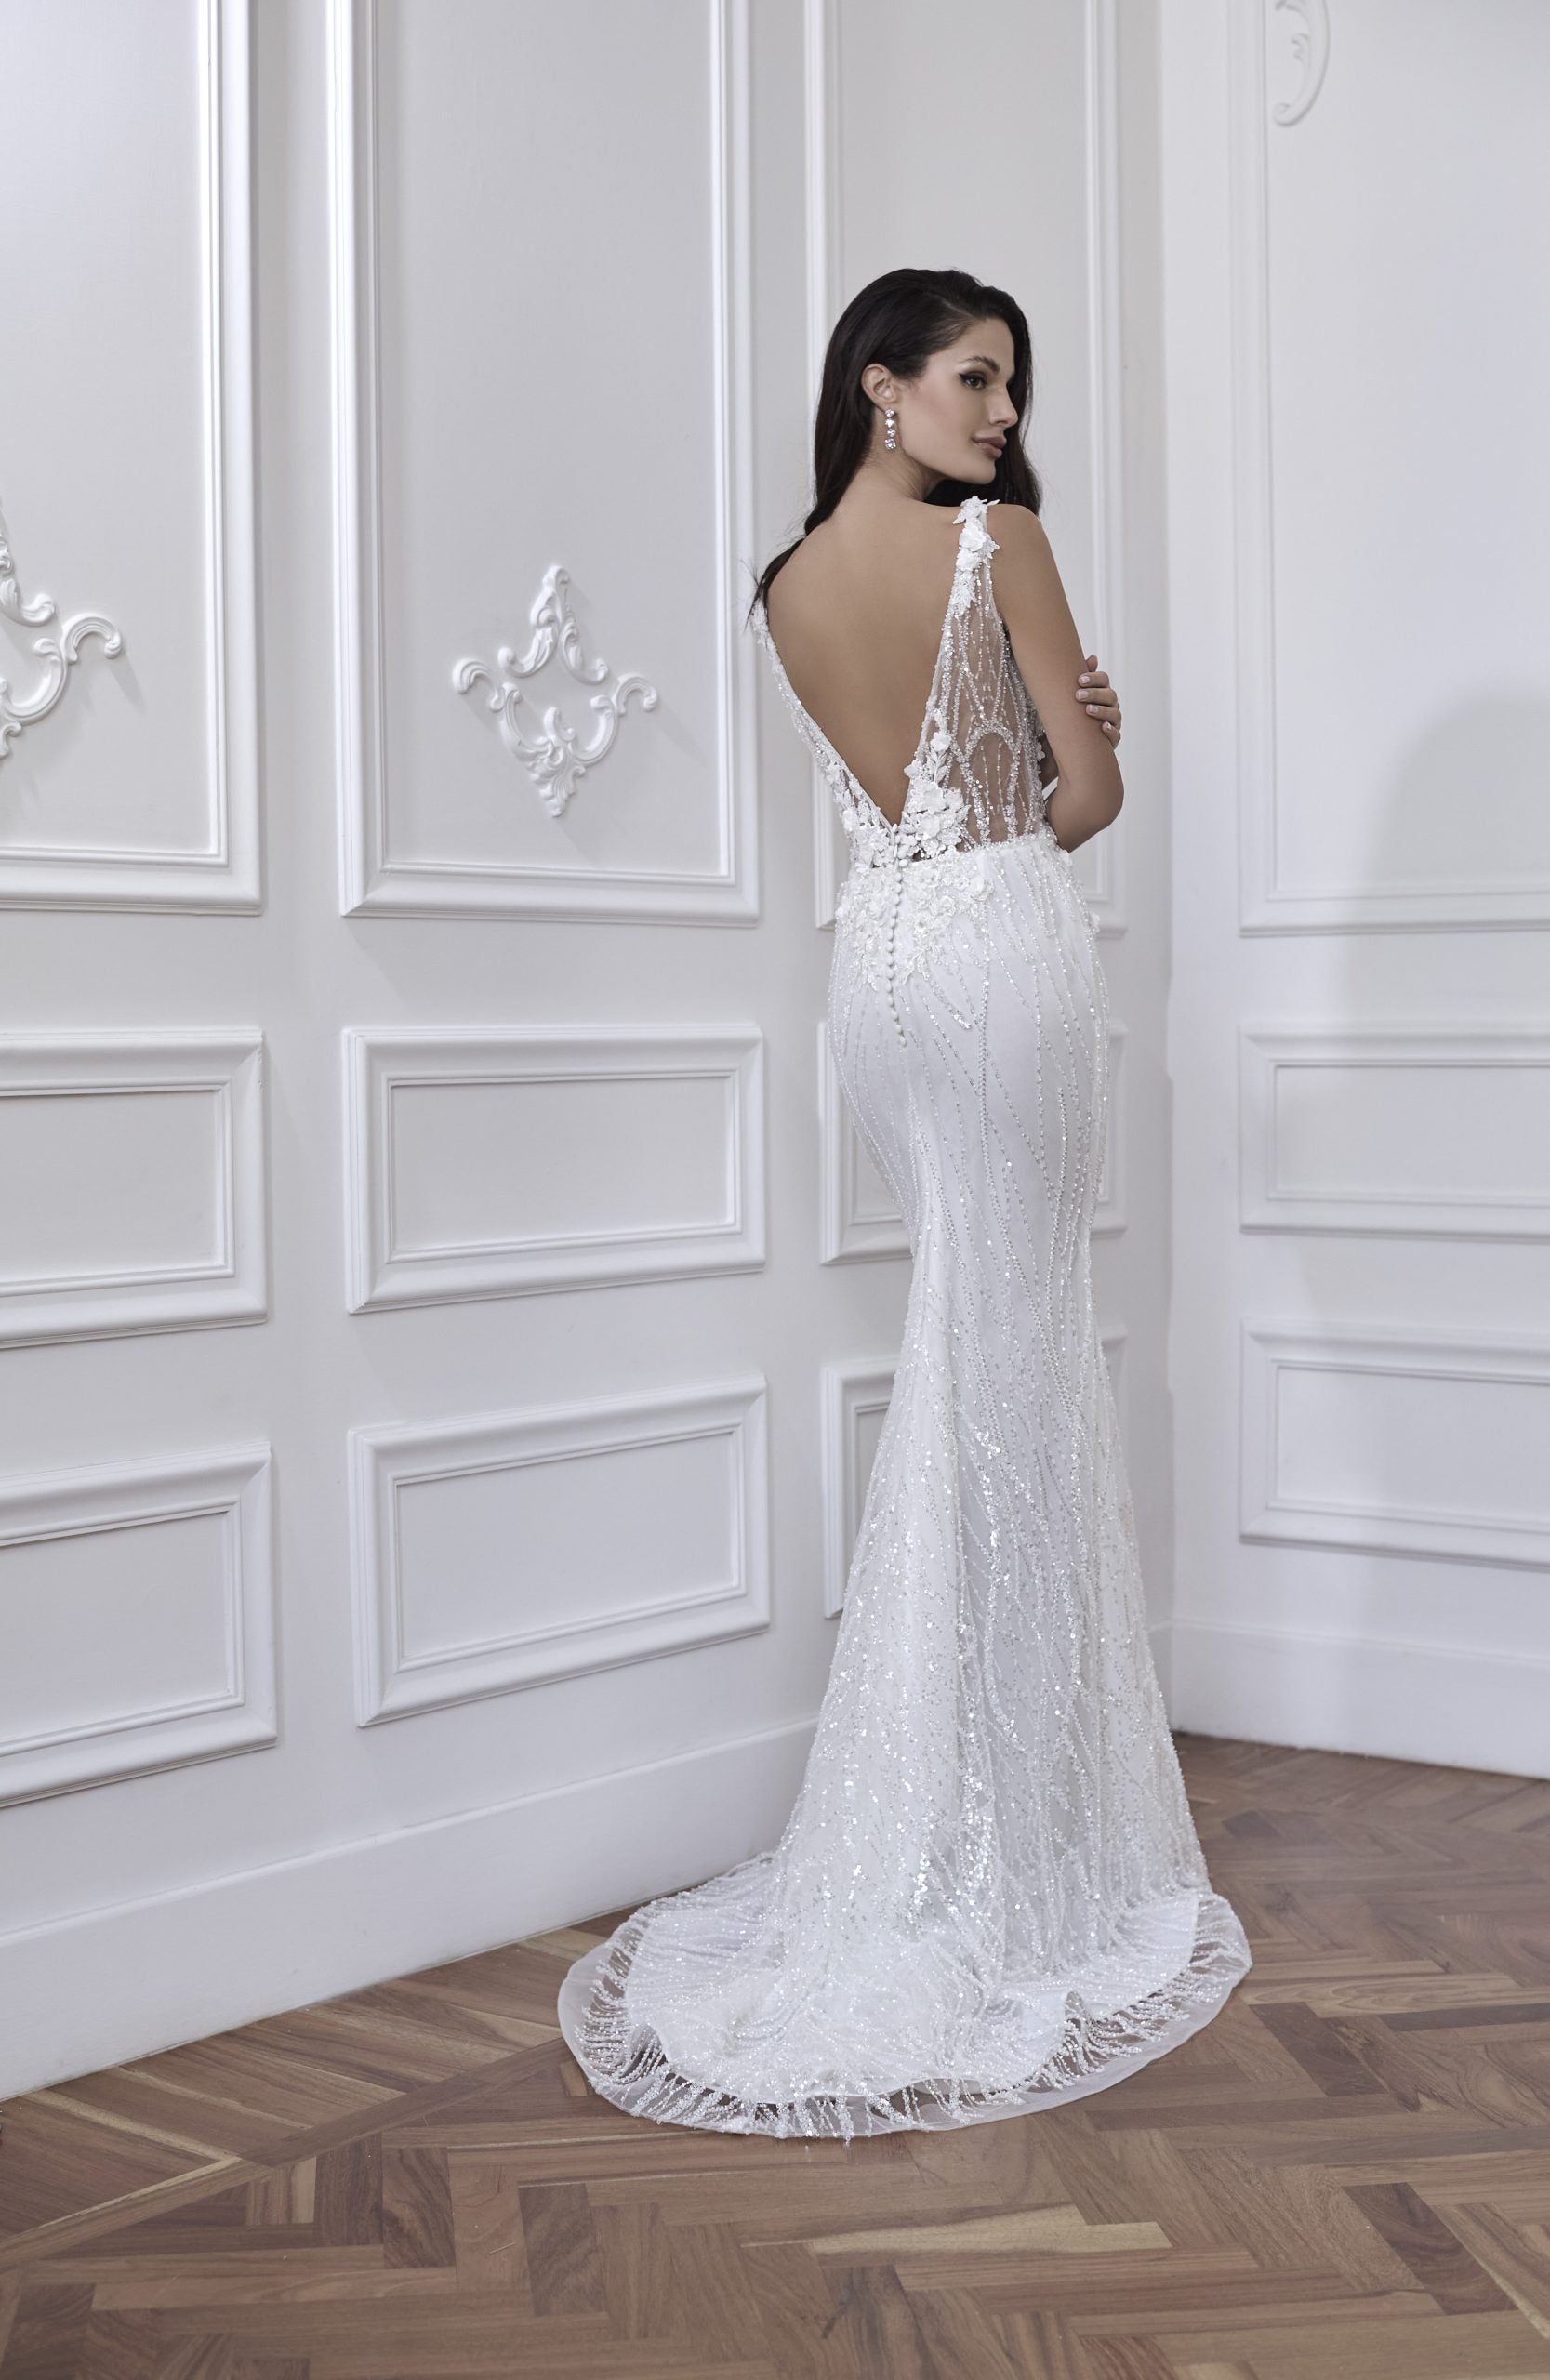 Sleeveless Beaded Fit And Flare Wedding Dress With Open Back by Maison Signore - Image 2